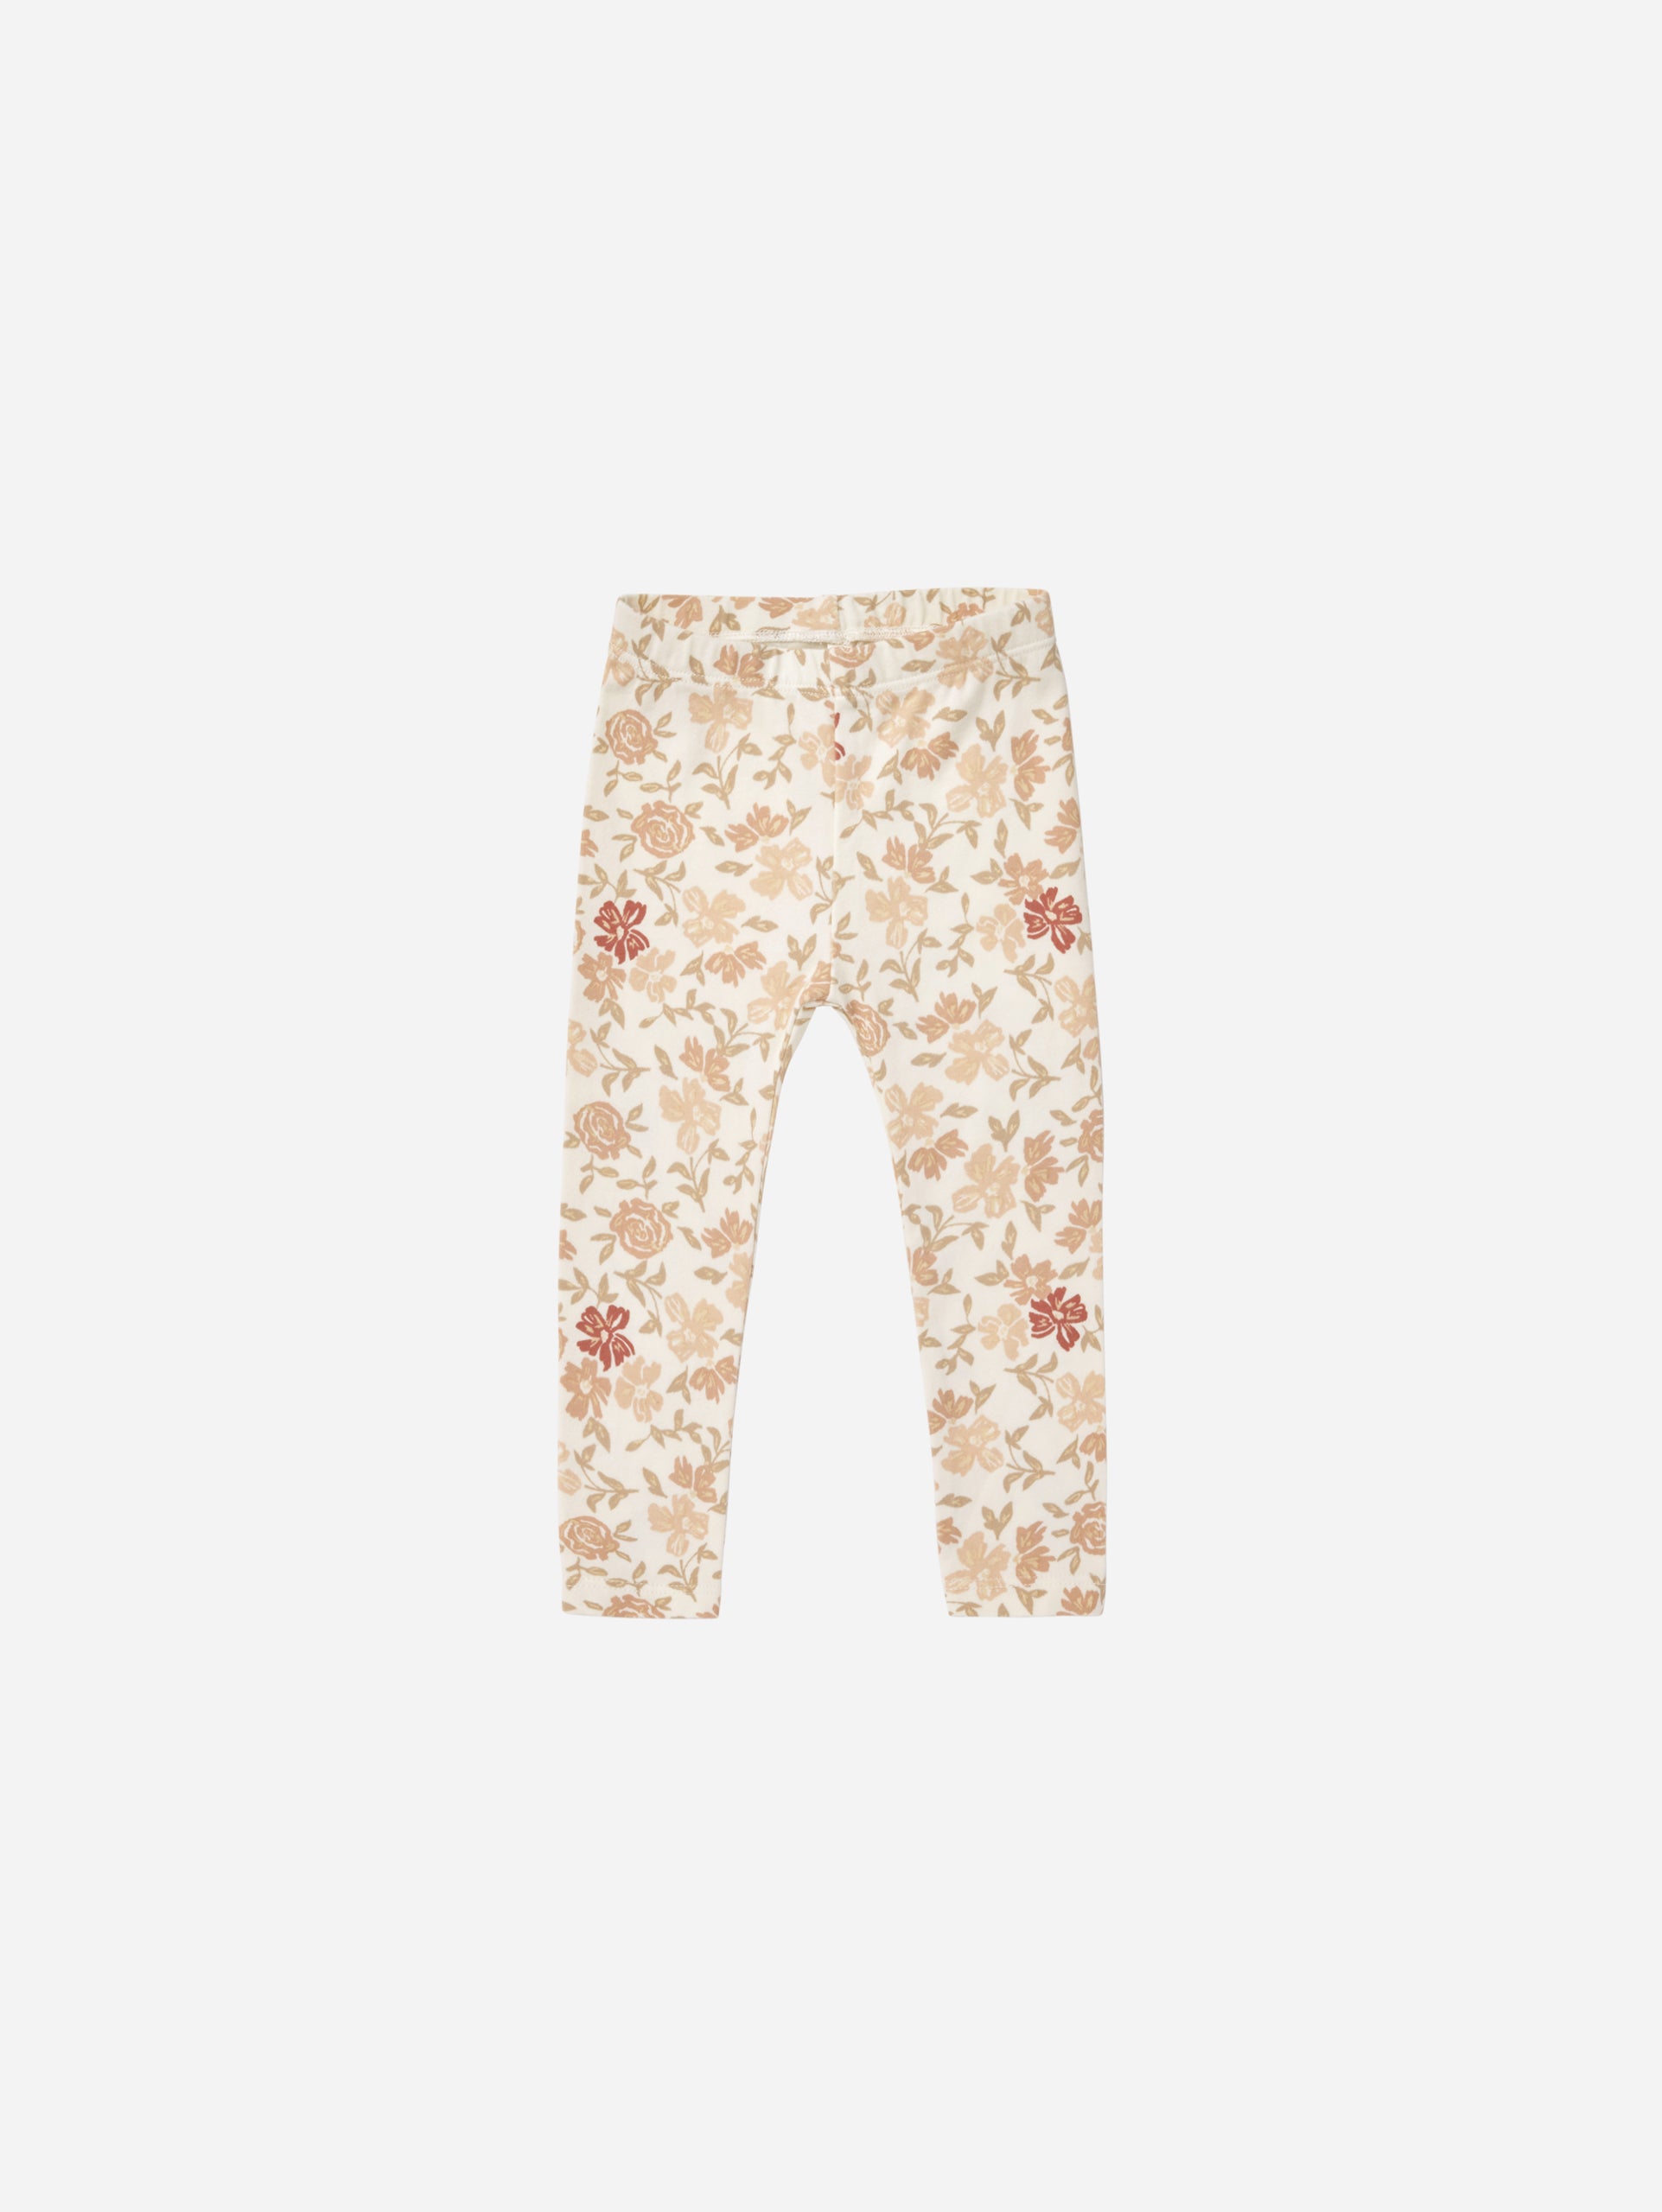 Legging || Pink Floral - Rylee + Cru | Kids Clothes | Trendy Baby Clothes | Modern Infant Outfits |